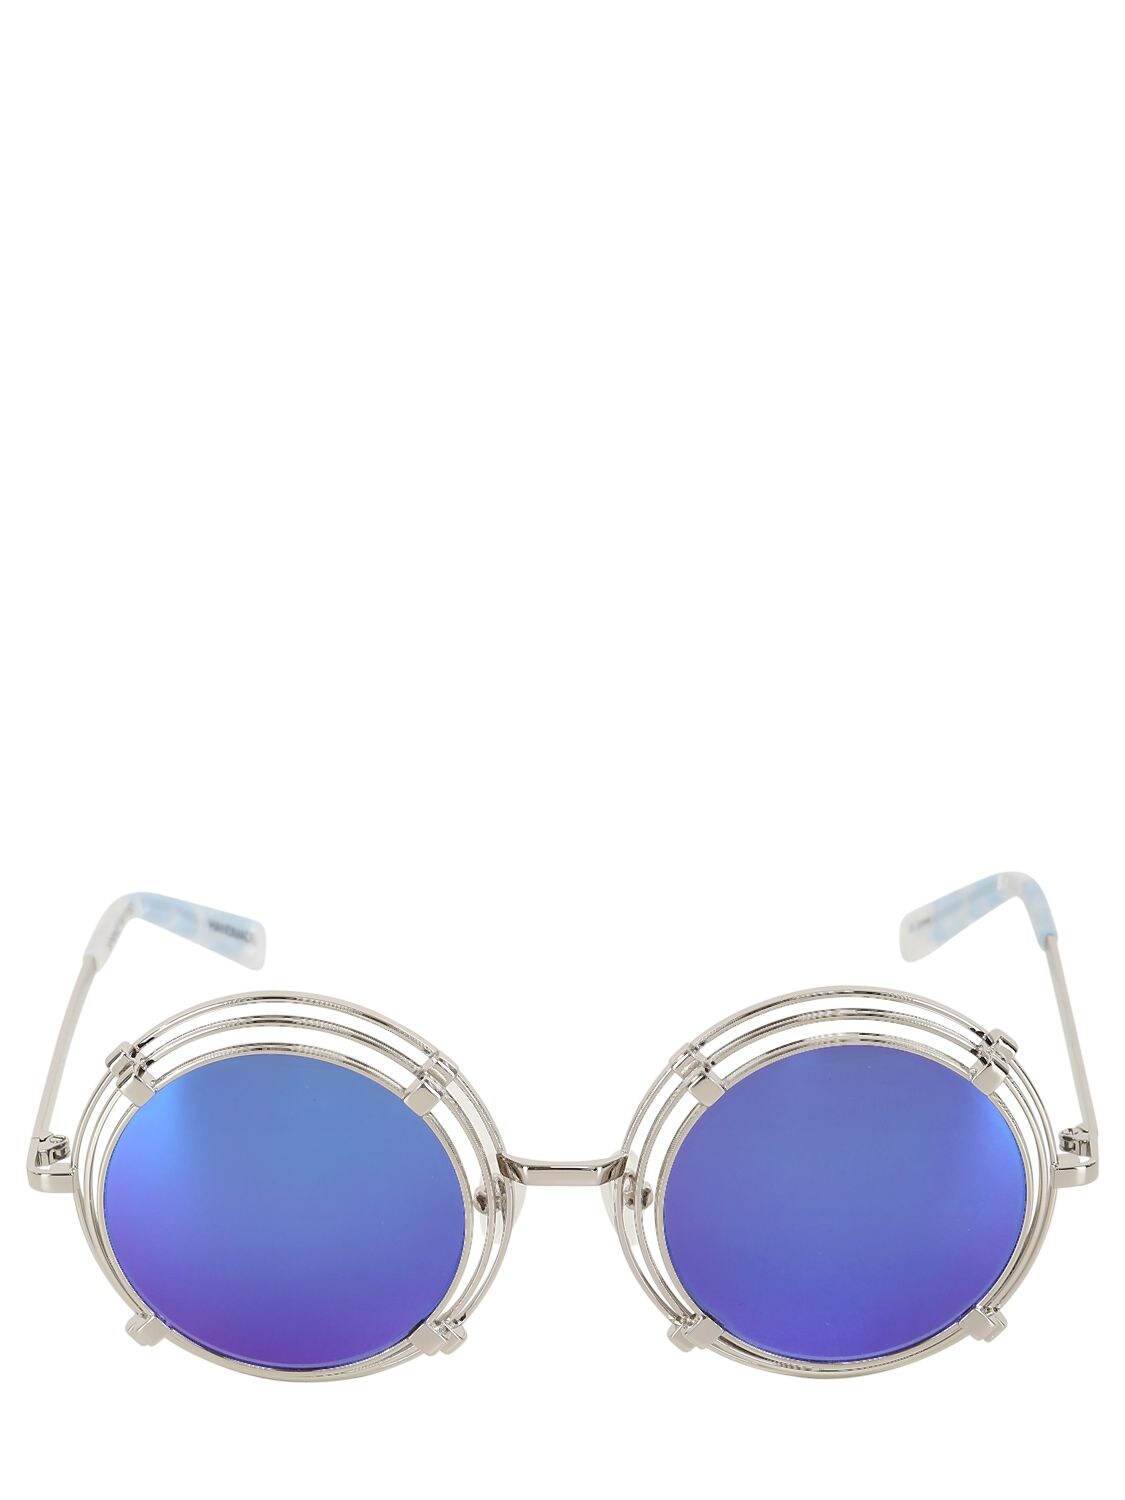 House Of Holland Spring Metal Rounded Sunglasses In Silver